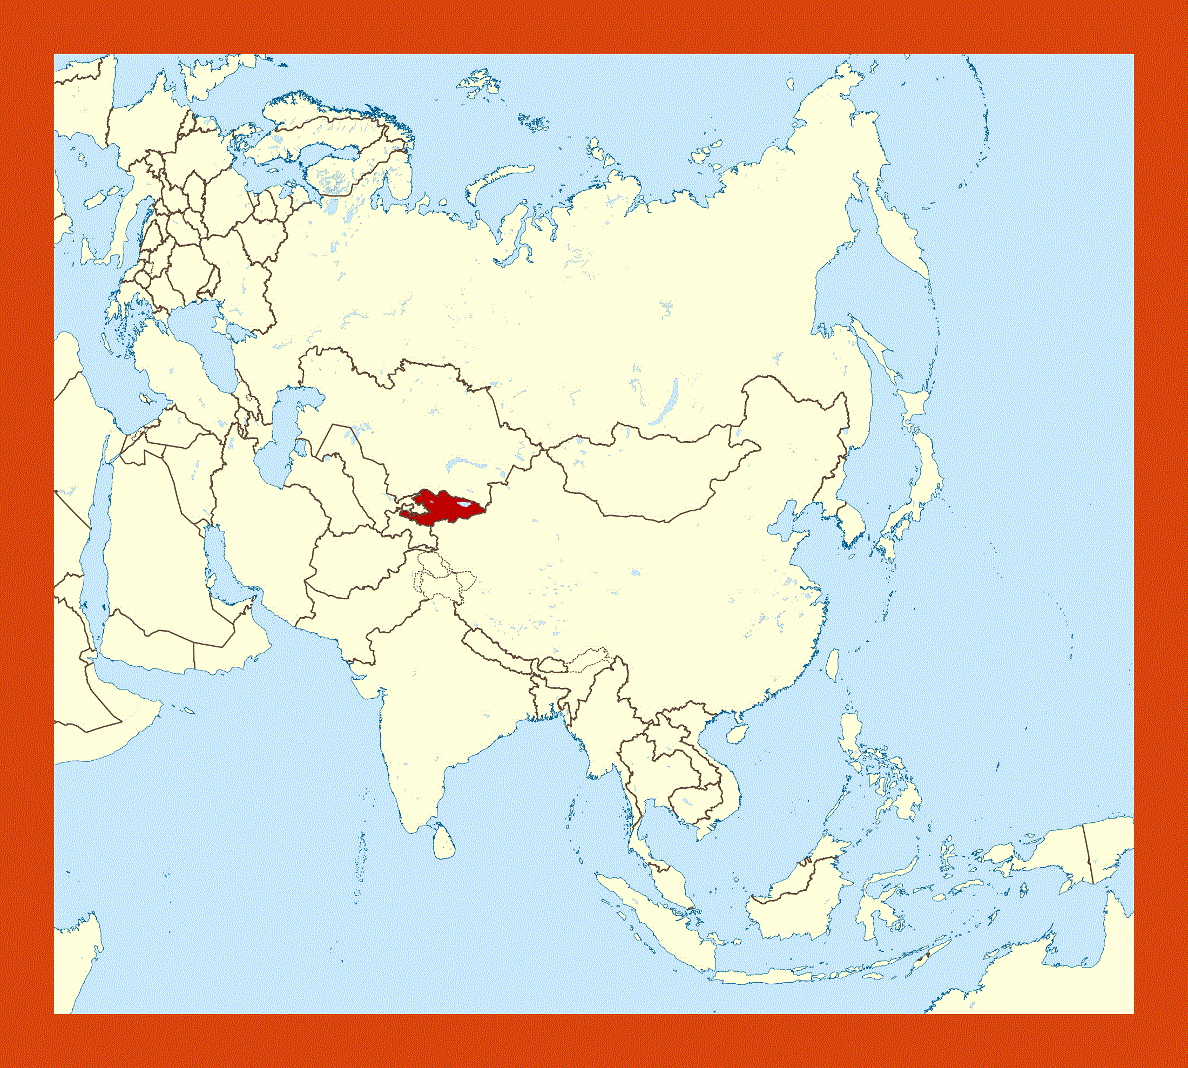 Location map of Kyrgyzstan in Asia